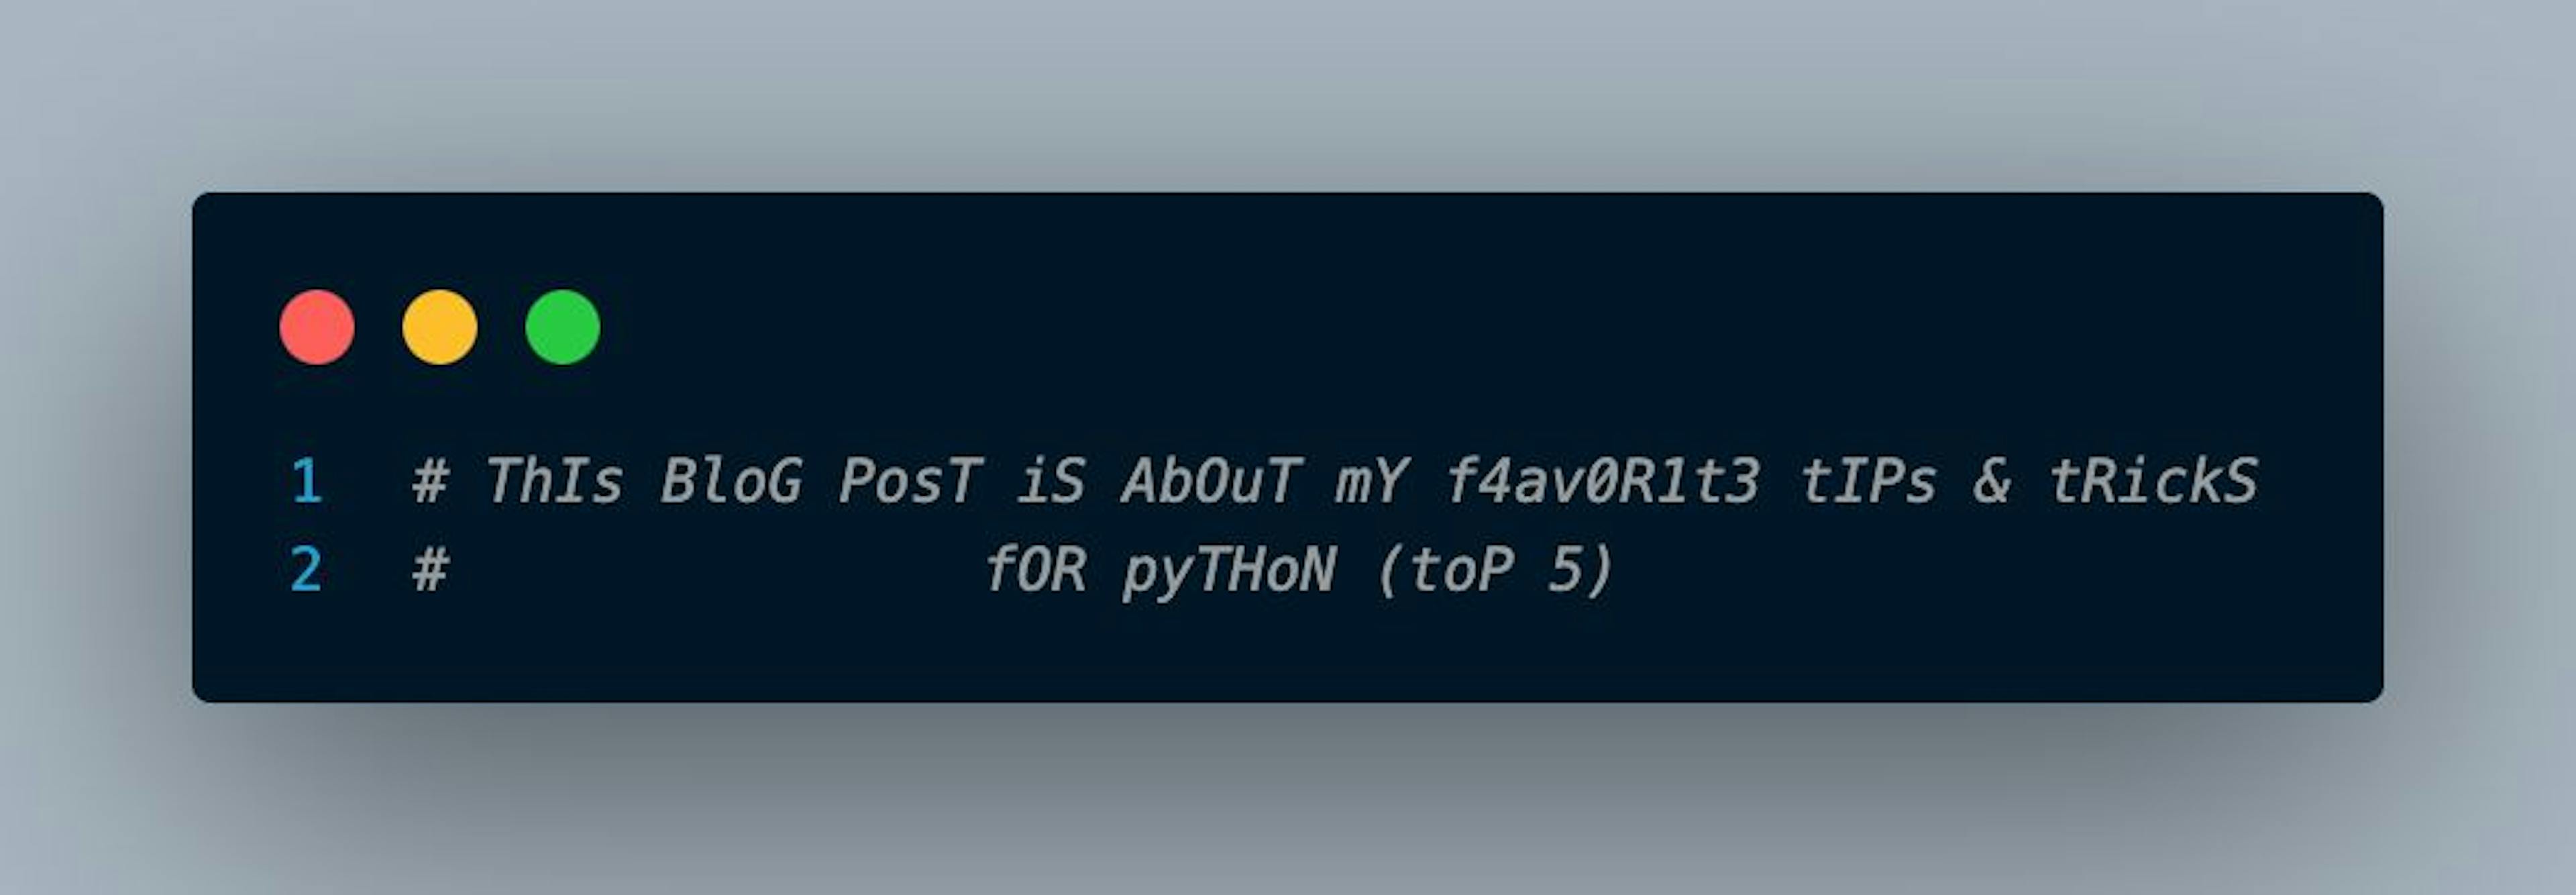 featured image - My Top 5 Favorite Python Tips and Tricks!